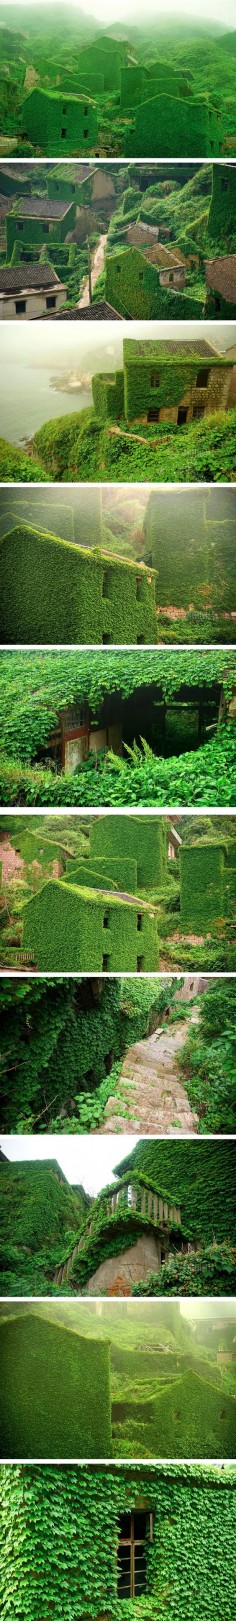 Shengsi, an archipelago of almost 400 islands at the mouth of China’s Yangtze river, holds a secret shrouded in time – an abandoned fishing village being reclaimed by nature. These photos by Tang Yuhong, a creative photographer based in Nanning, take us into this lost village on Goqui island.